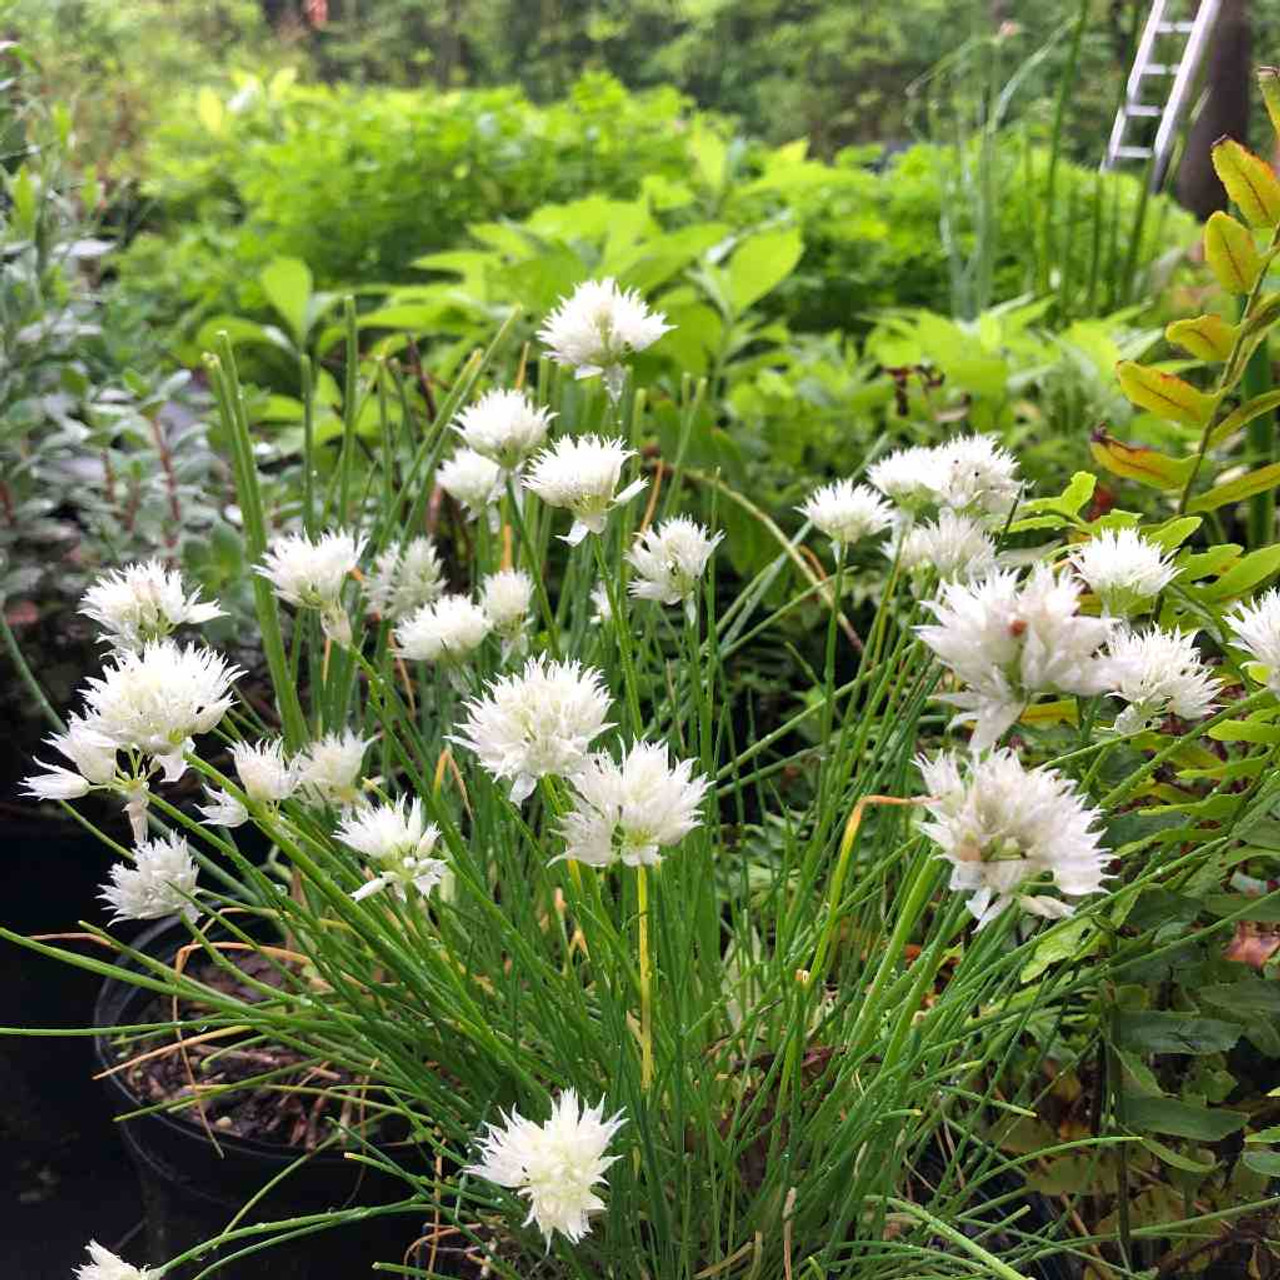 White Flowering Chives ('Album') is chic looking perennial and edible plant too